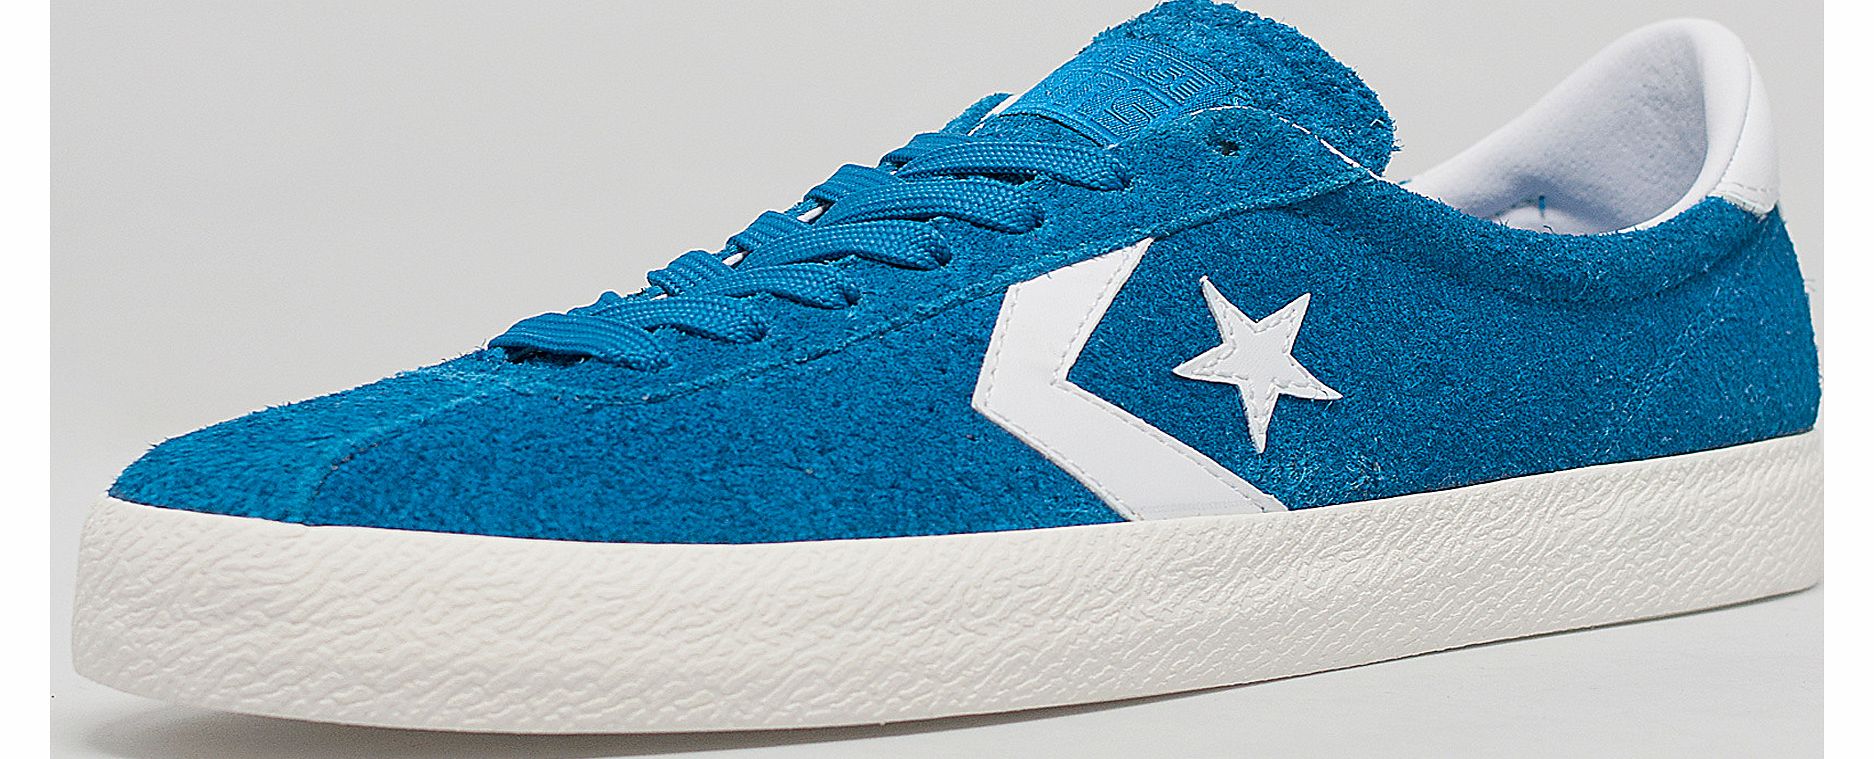 Converse Breakpoint OX - size? exclusive